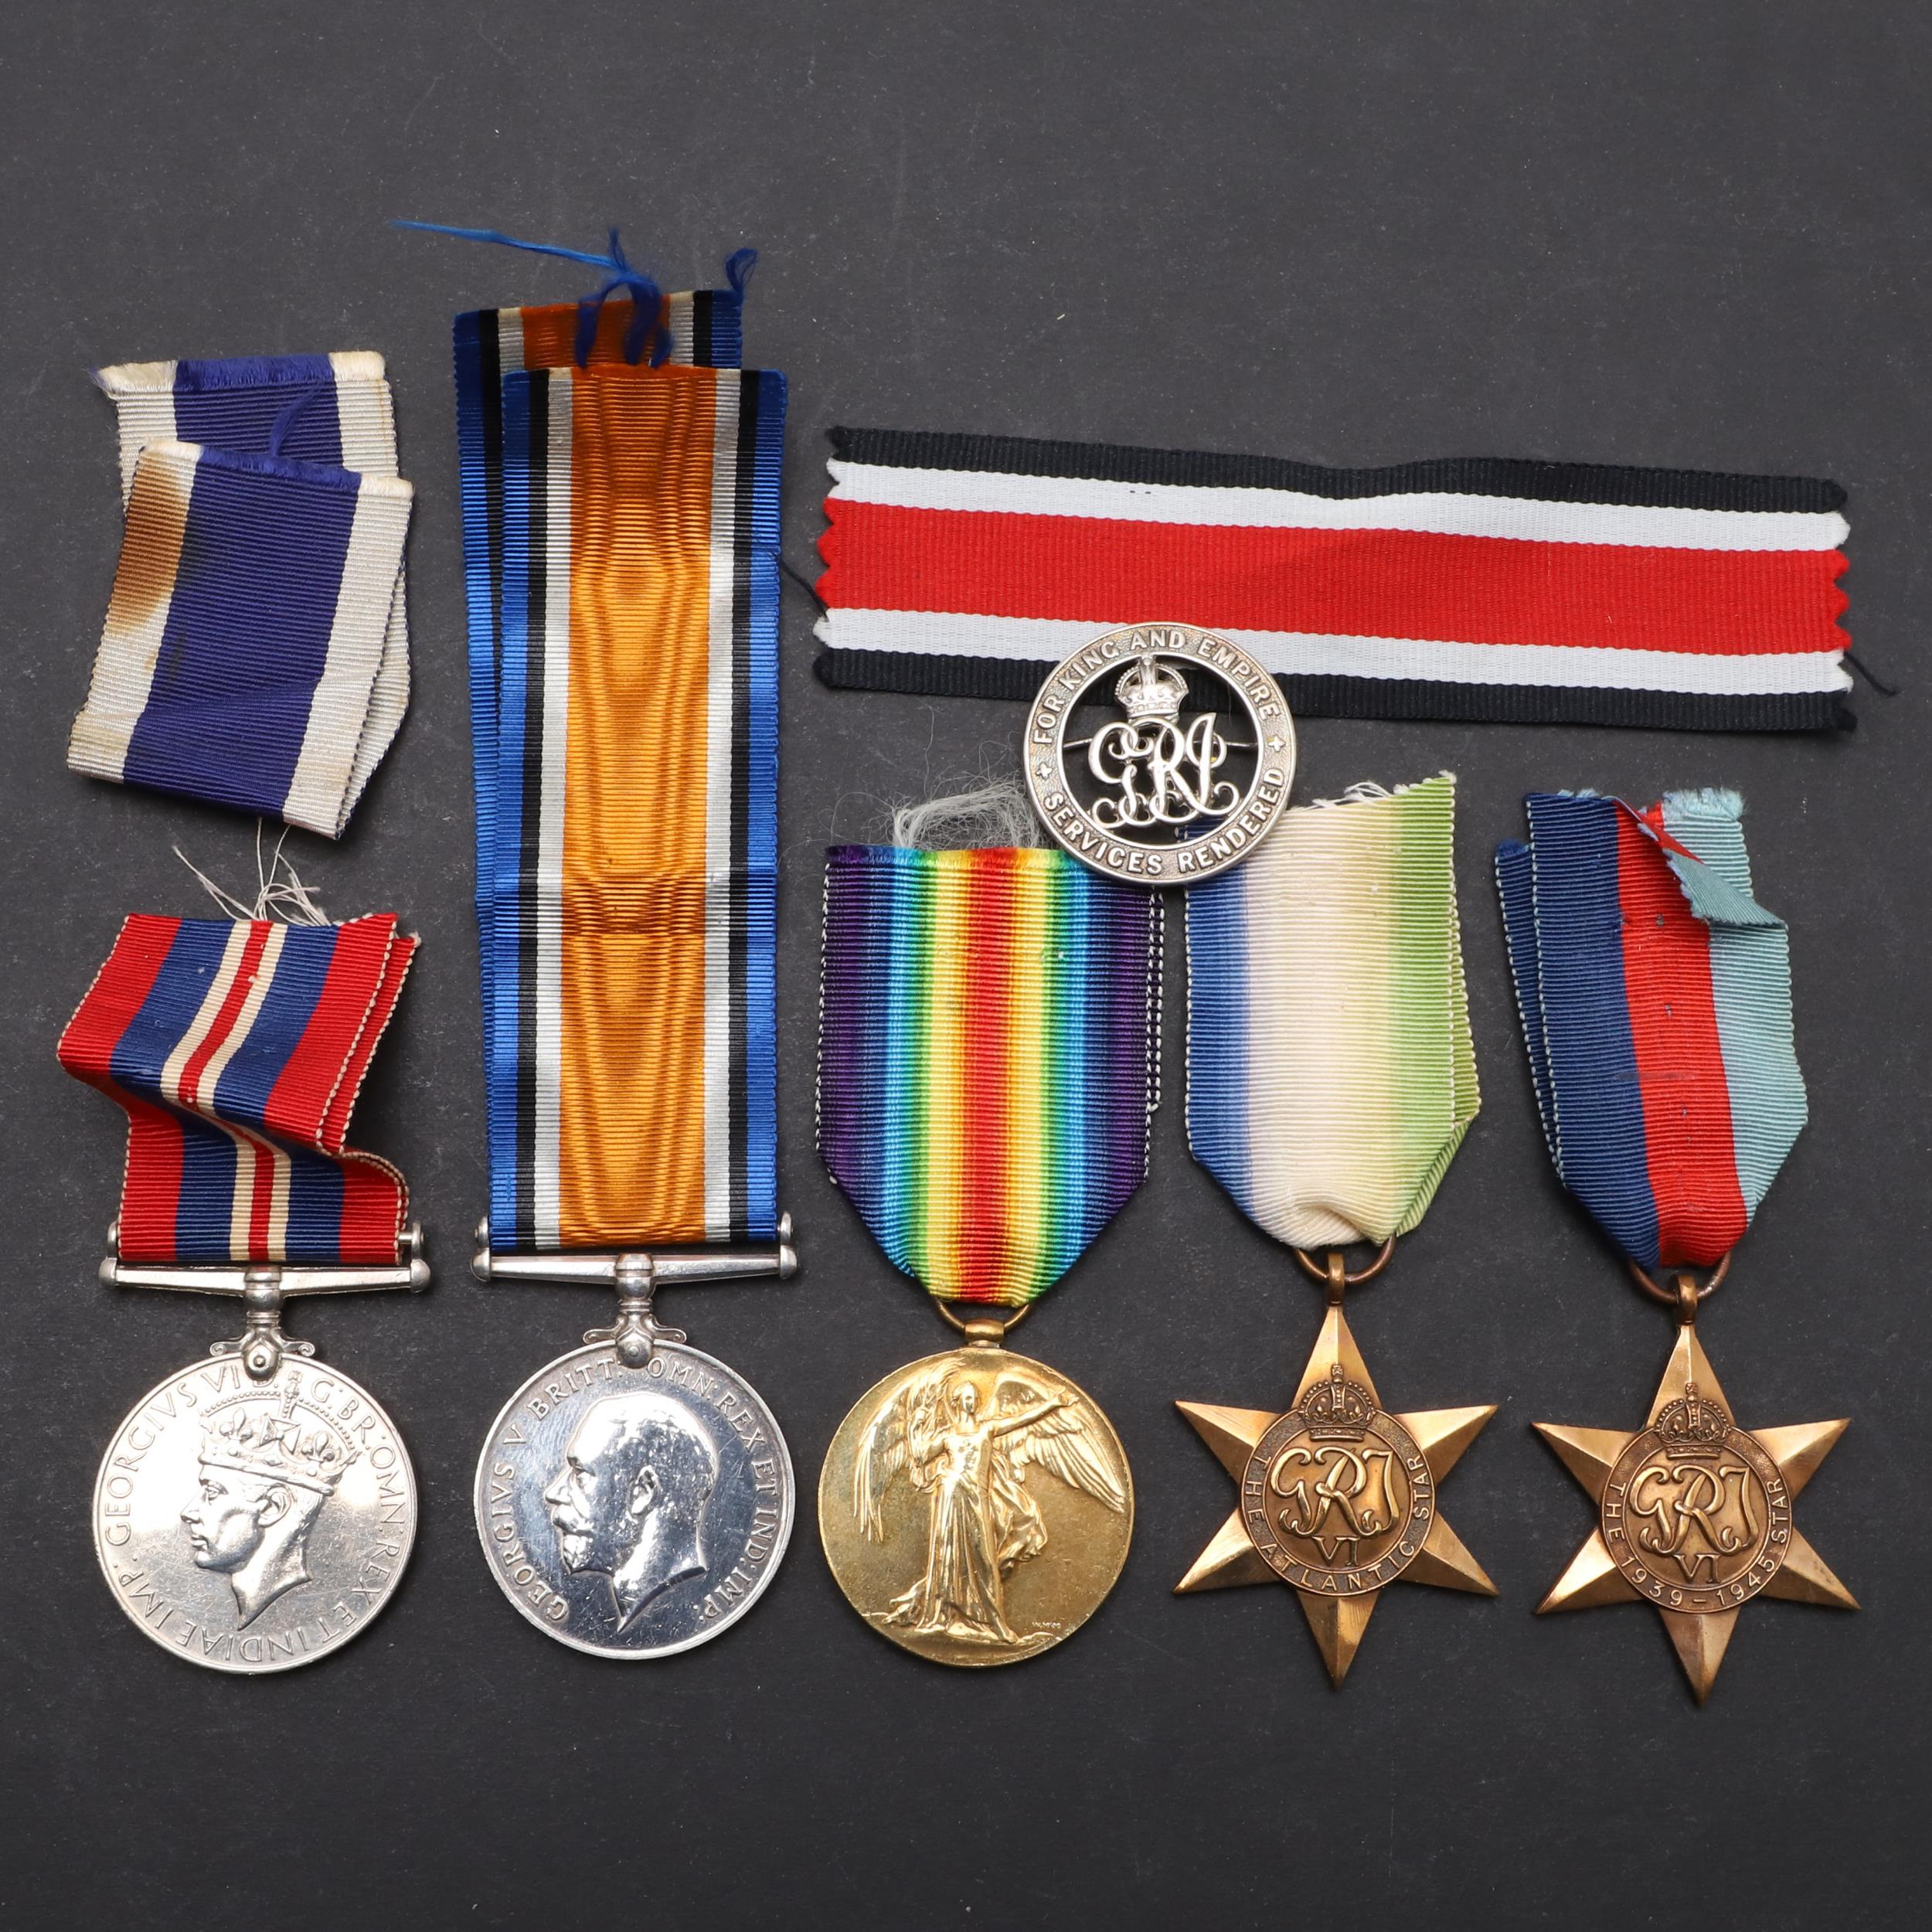 A FIRST WORLD WAR SILVER WAR BADGE AND A SMALL COLLECTION OF MEDALS.